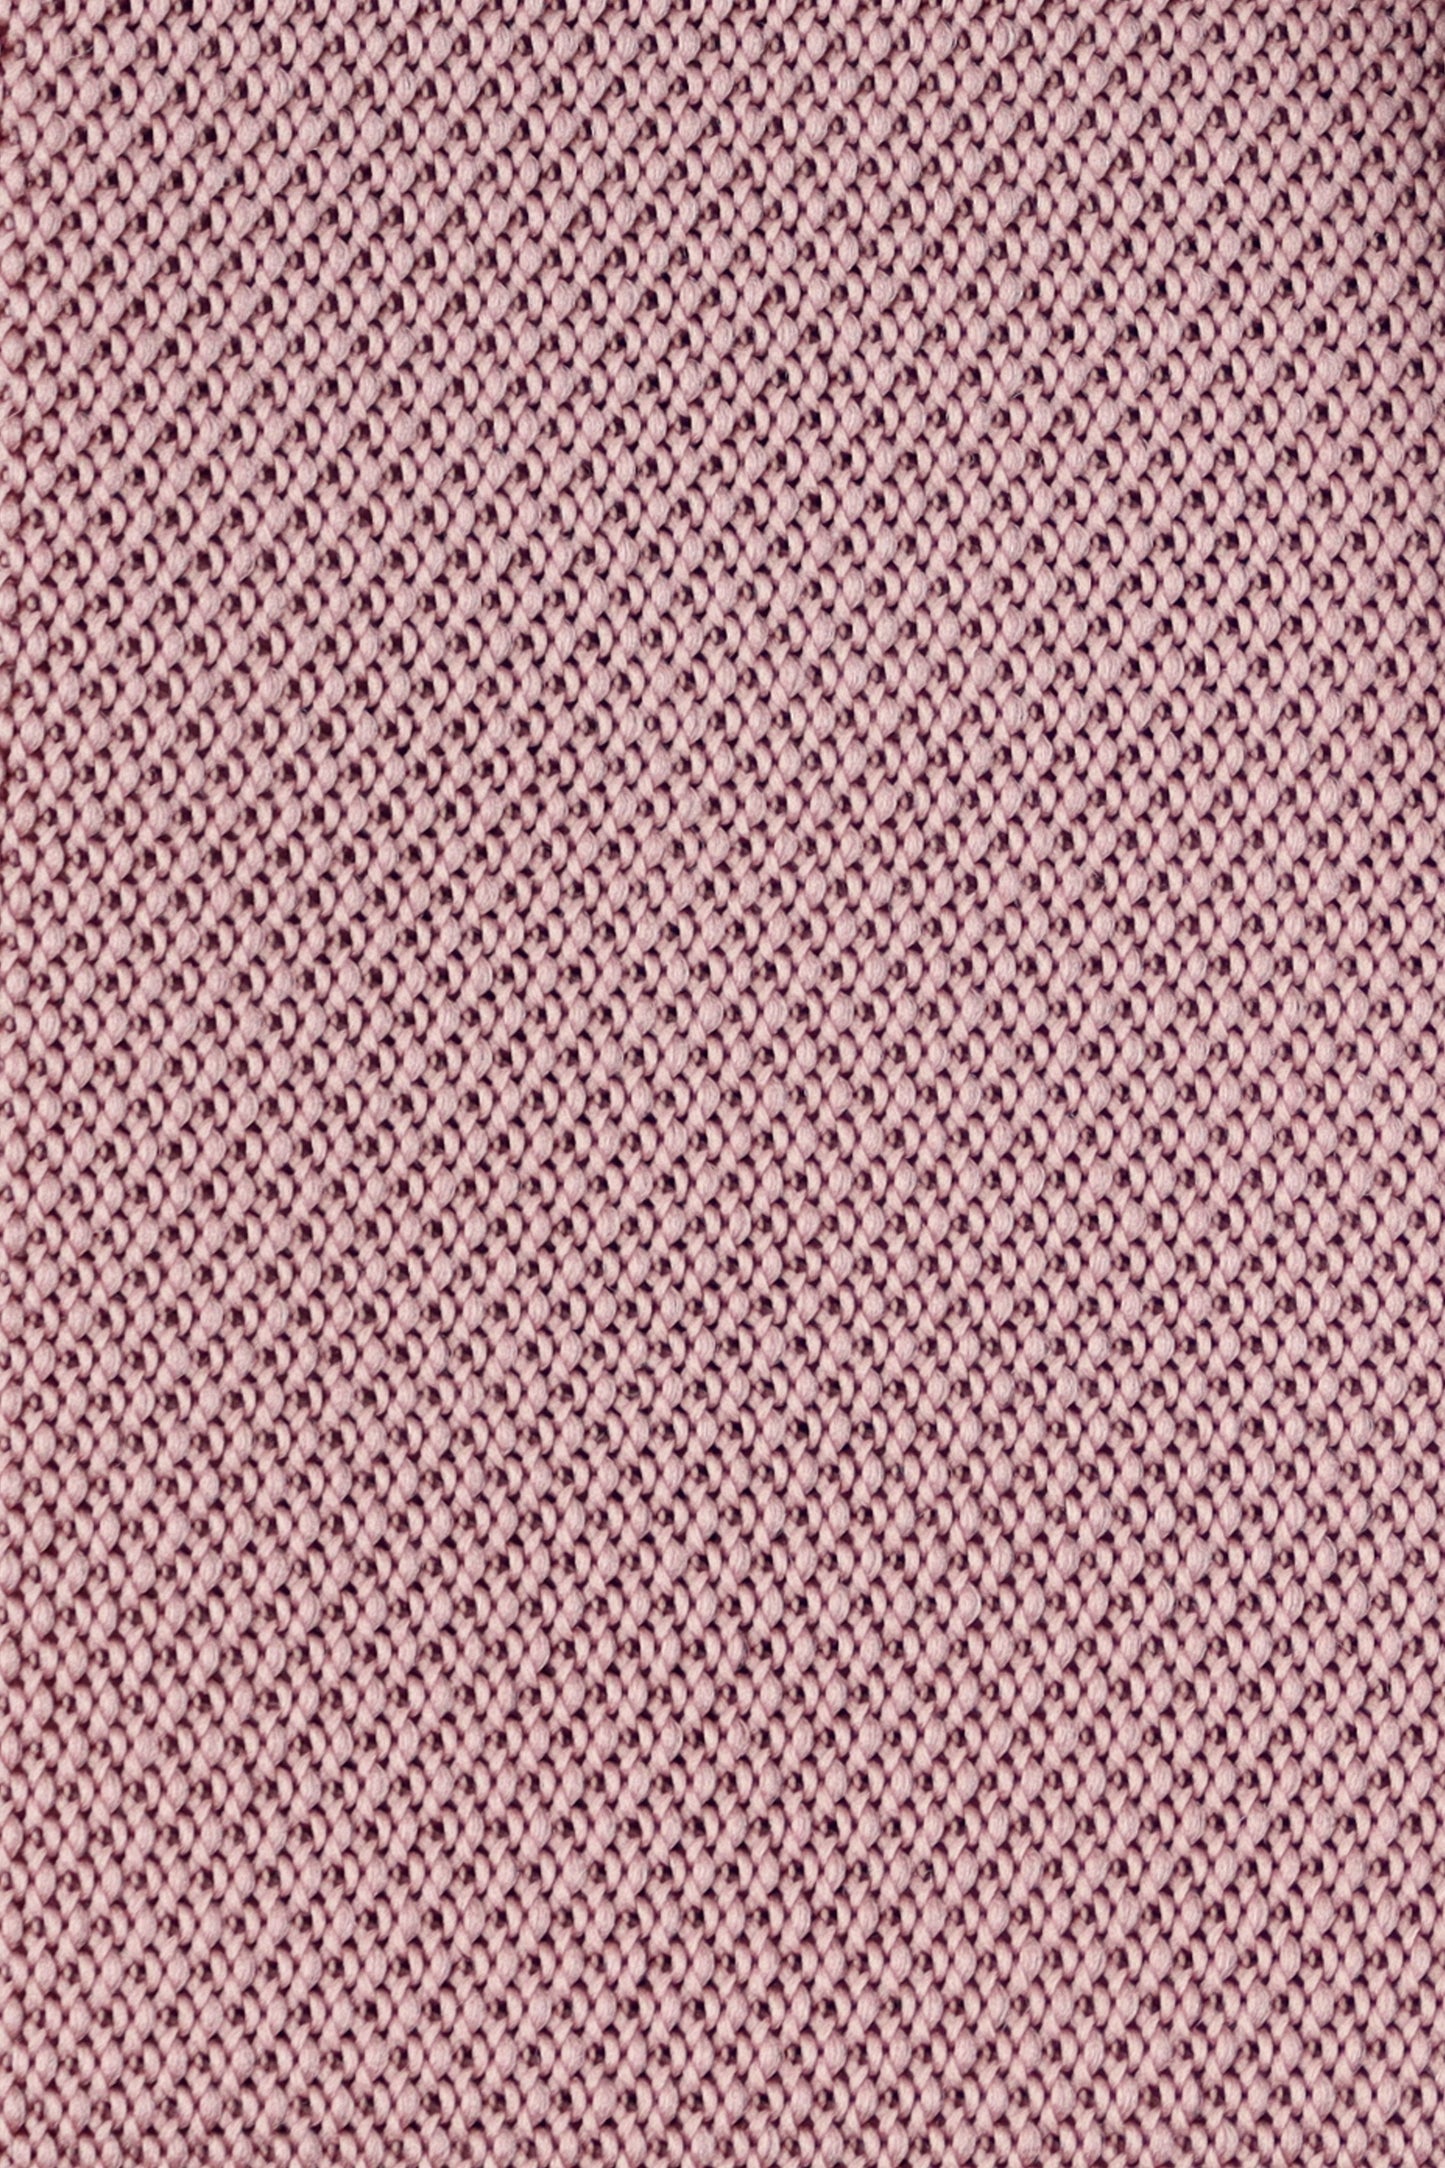 100% Polyester Square End Knitted Tie - Dusty Pink